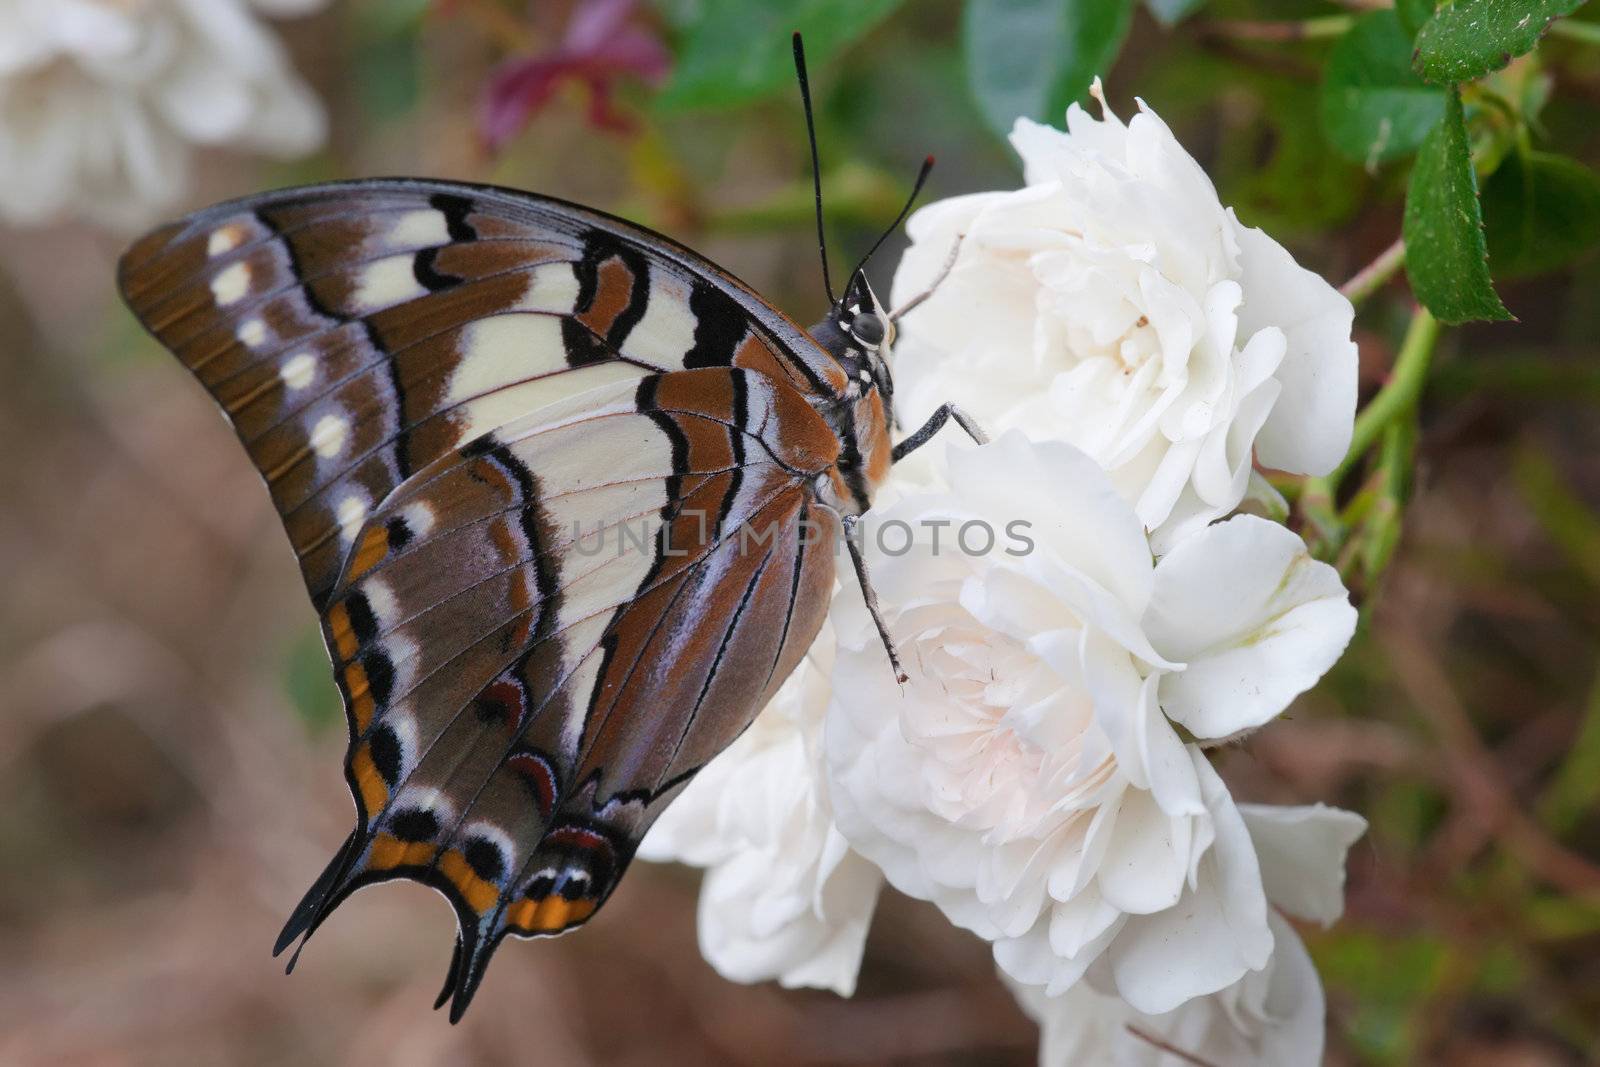 swallowtail buterfly on flower by clearviewstock